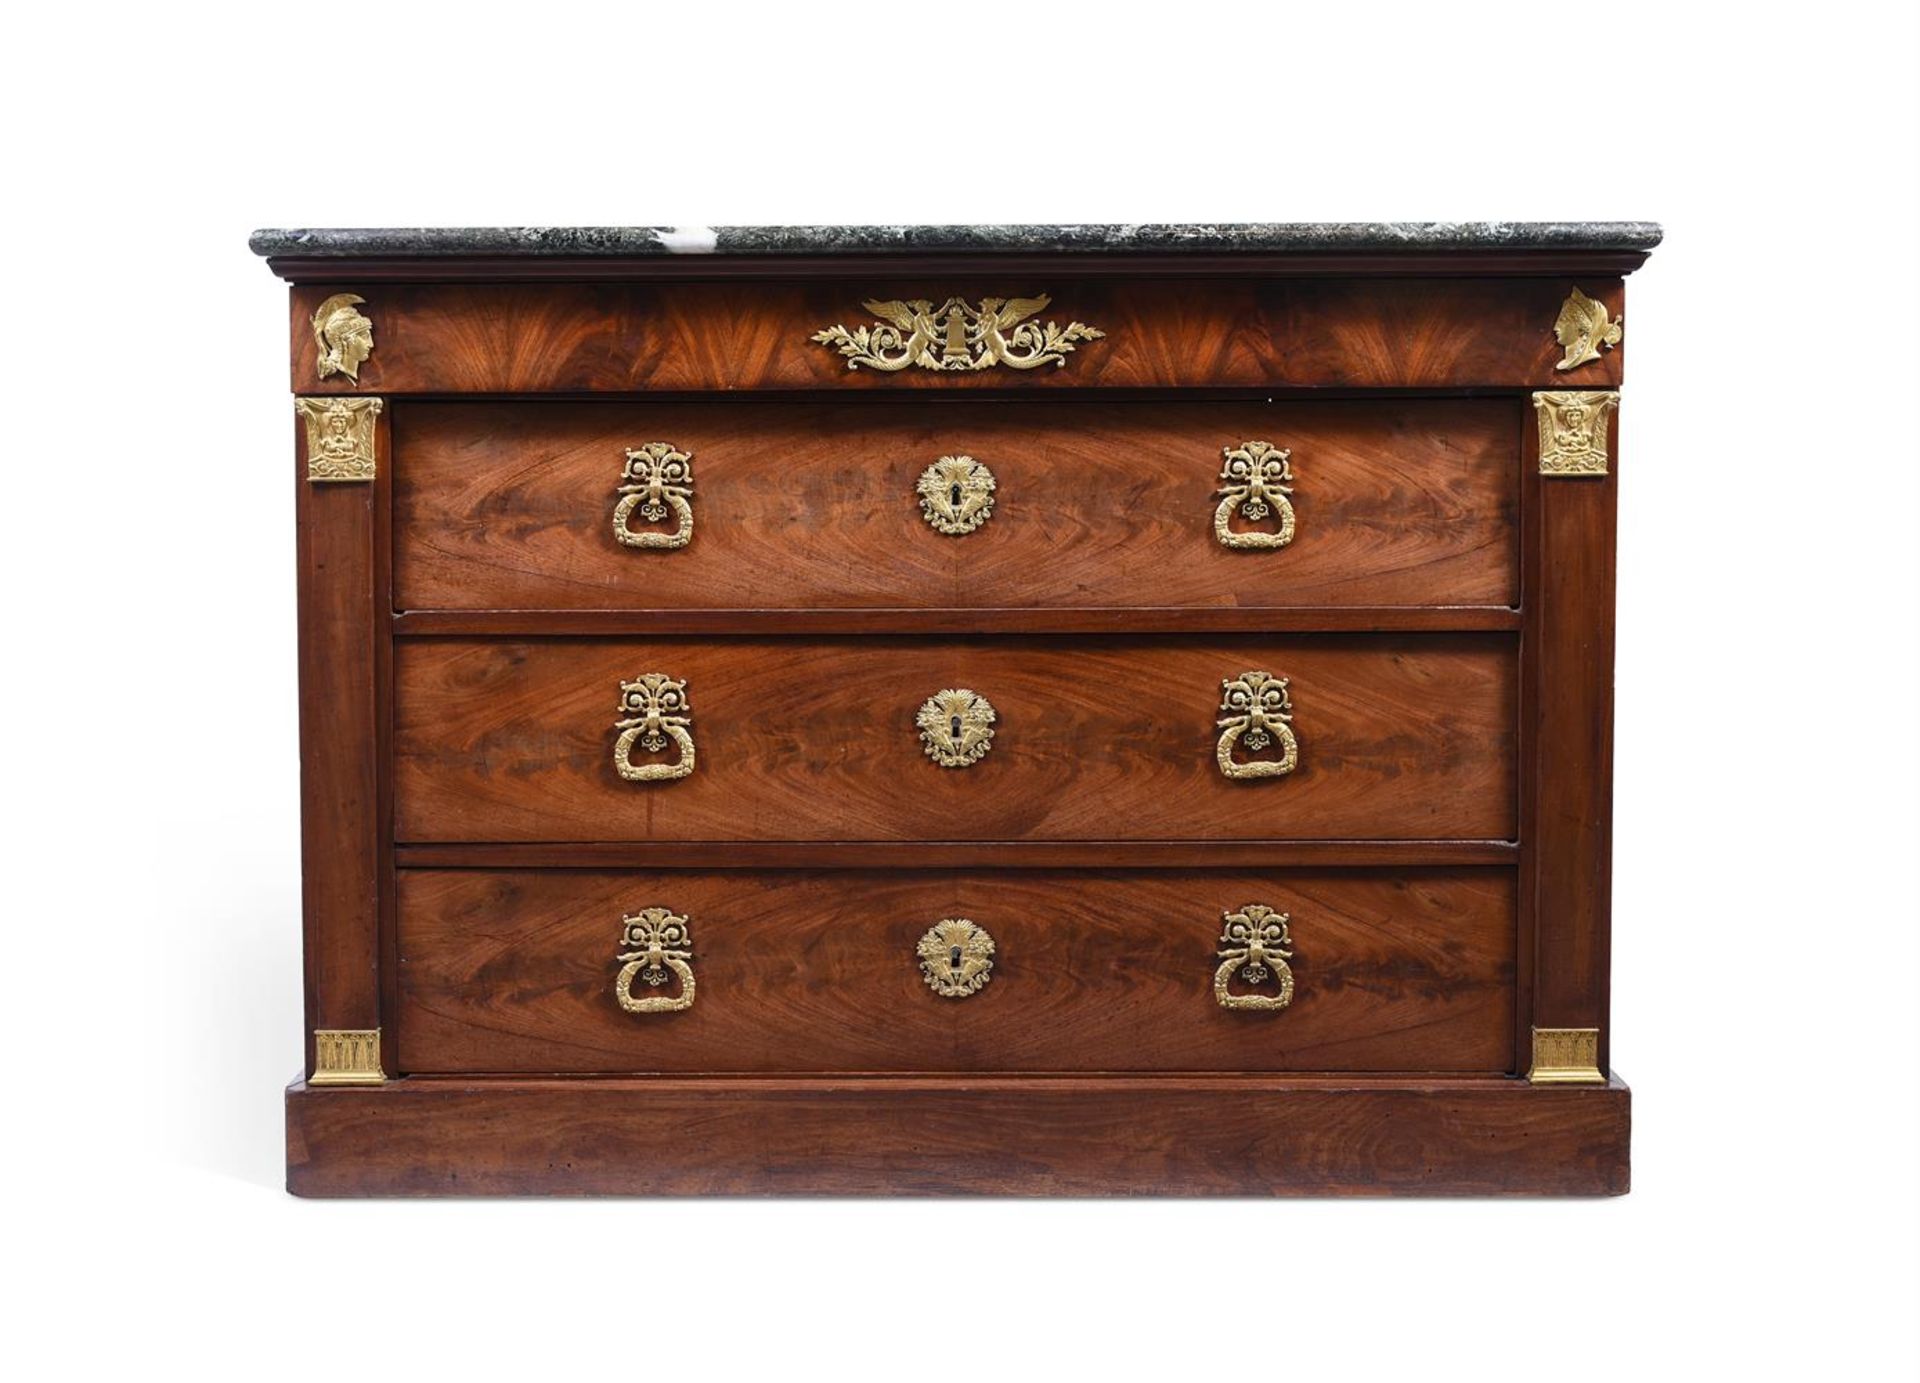 A FRENCH MAHOGANY AND ORMOLU MOUNTED COMMODE IN THE MANNER OF JACOB FRERES, EARLY 19TH CENTURY